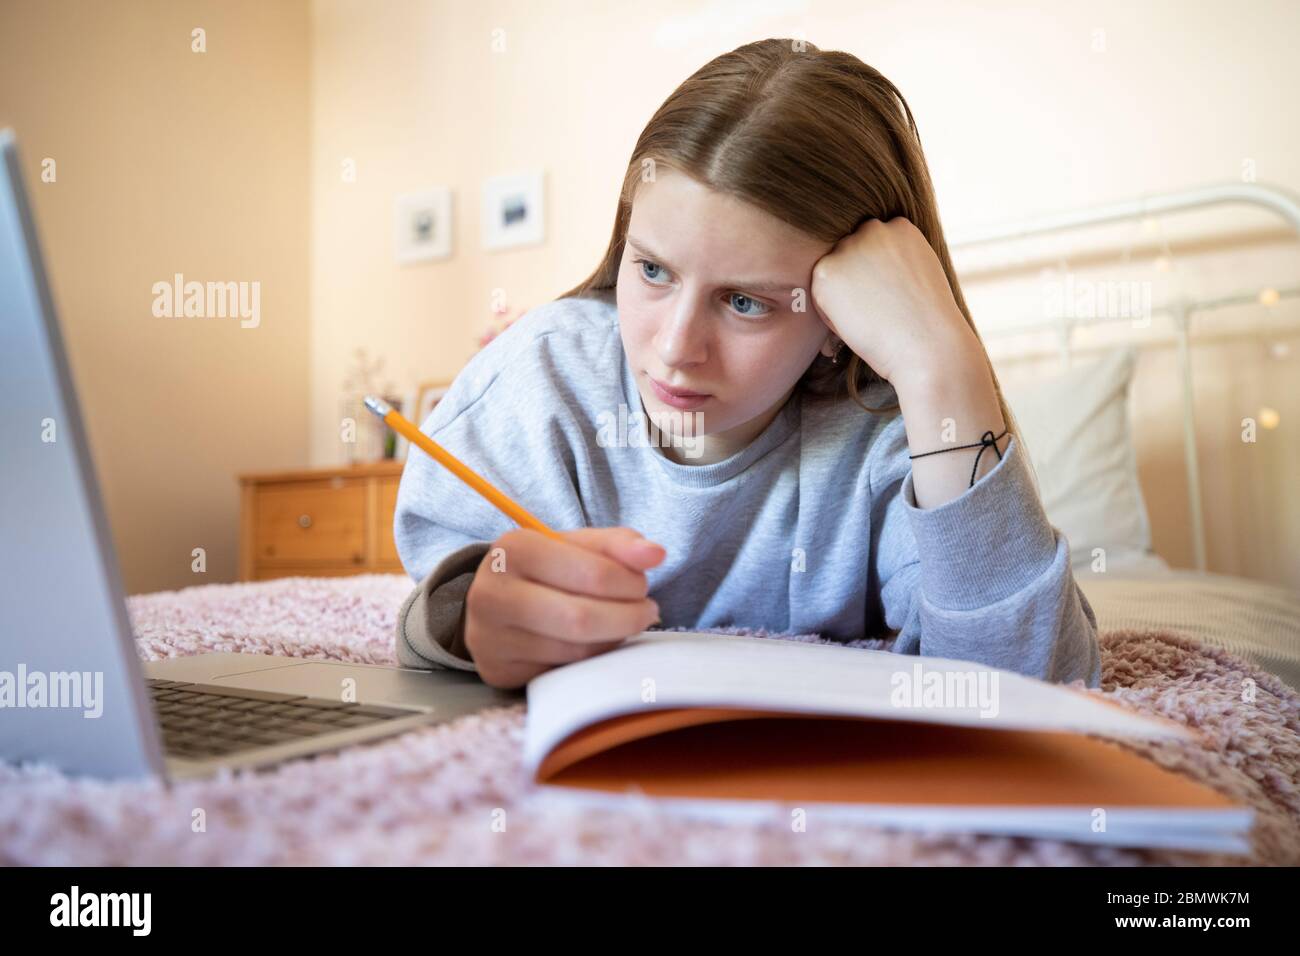 Stressed Female Teenager Having Problems Using Laptop For Homework Or Home Schooling Stock Photo